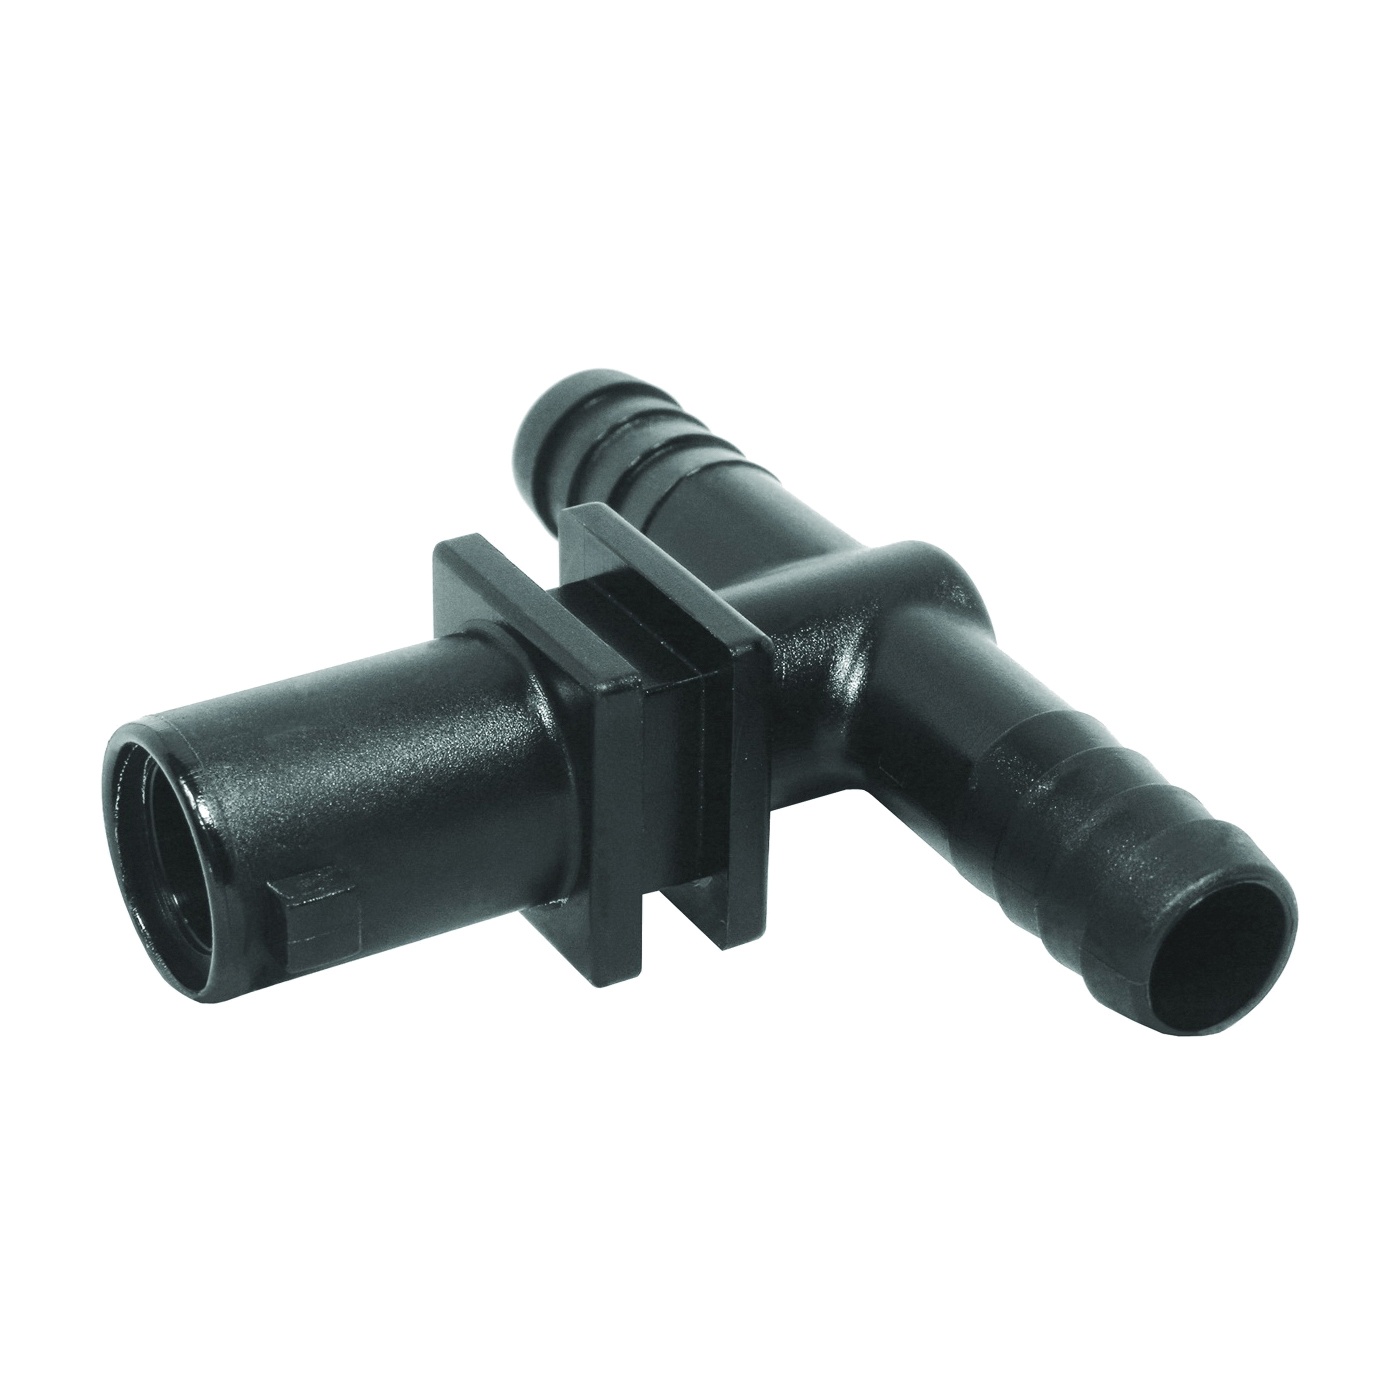 Y8231009 Dry Boom Nozzle Body Tee, 1/2 in, Quick x Hose Barb, 7 psi Pressure, EPDM Rubber